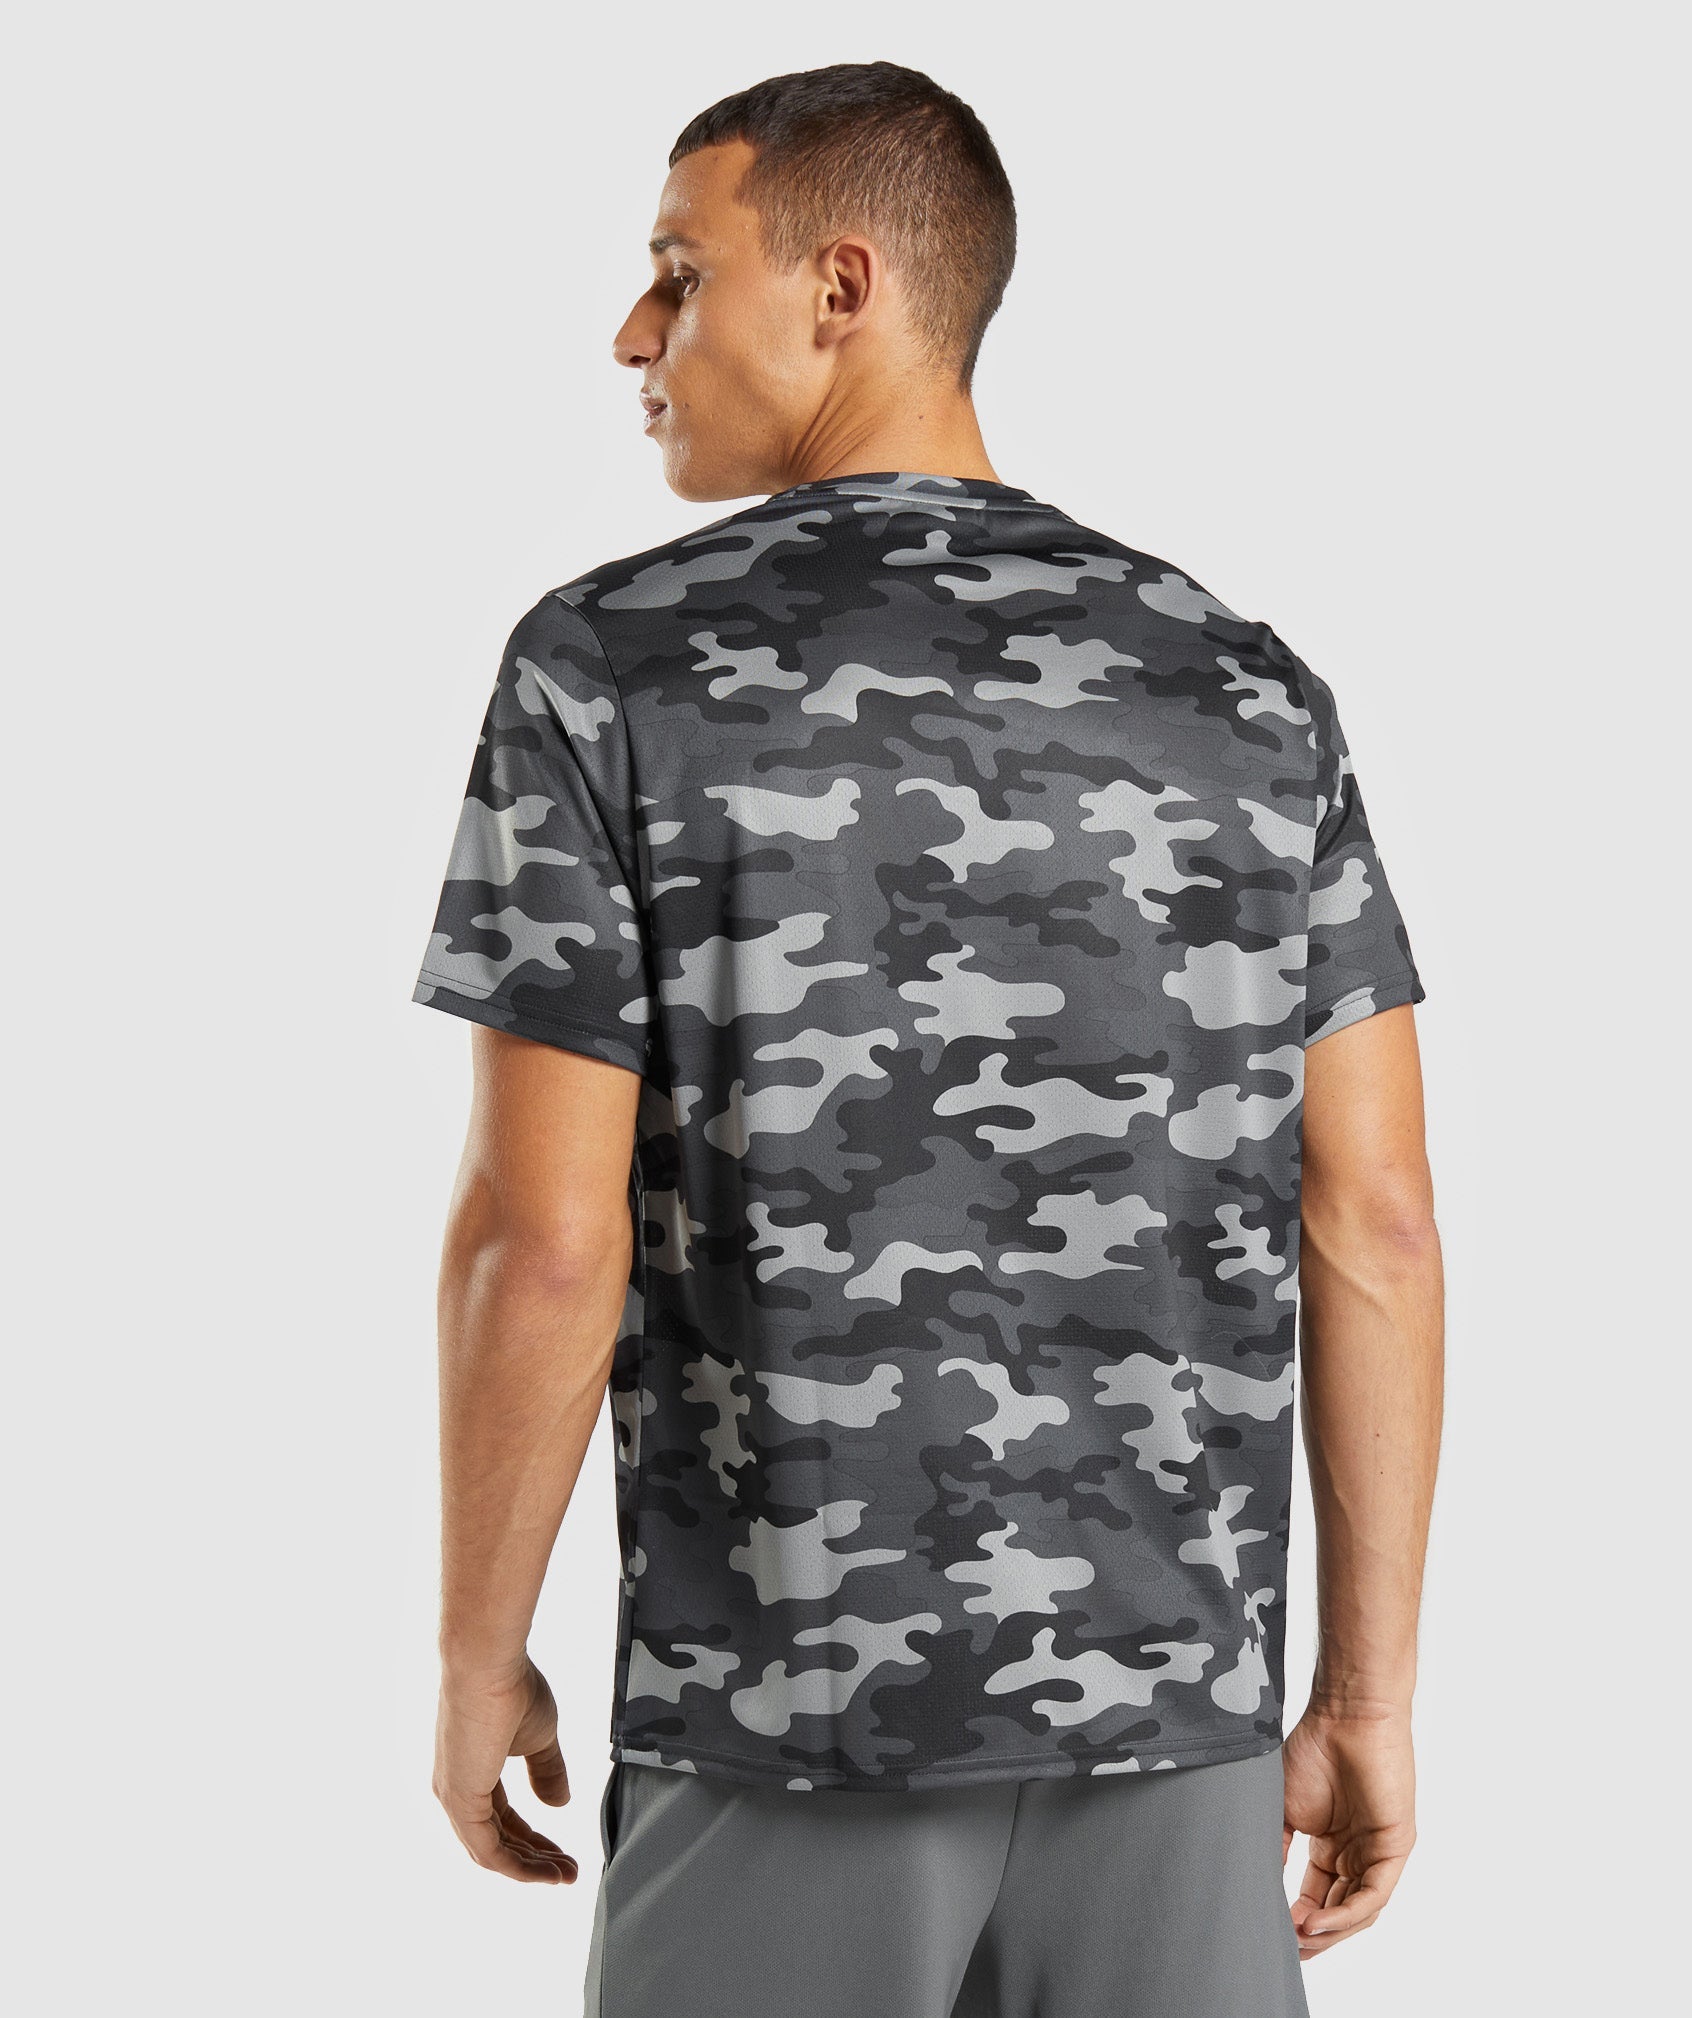 Arrival T-Shirt in Grey Print - view 2